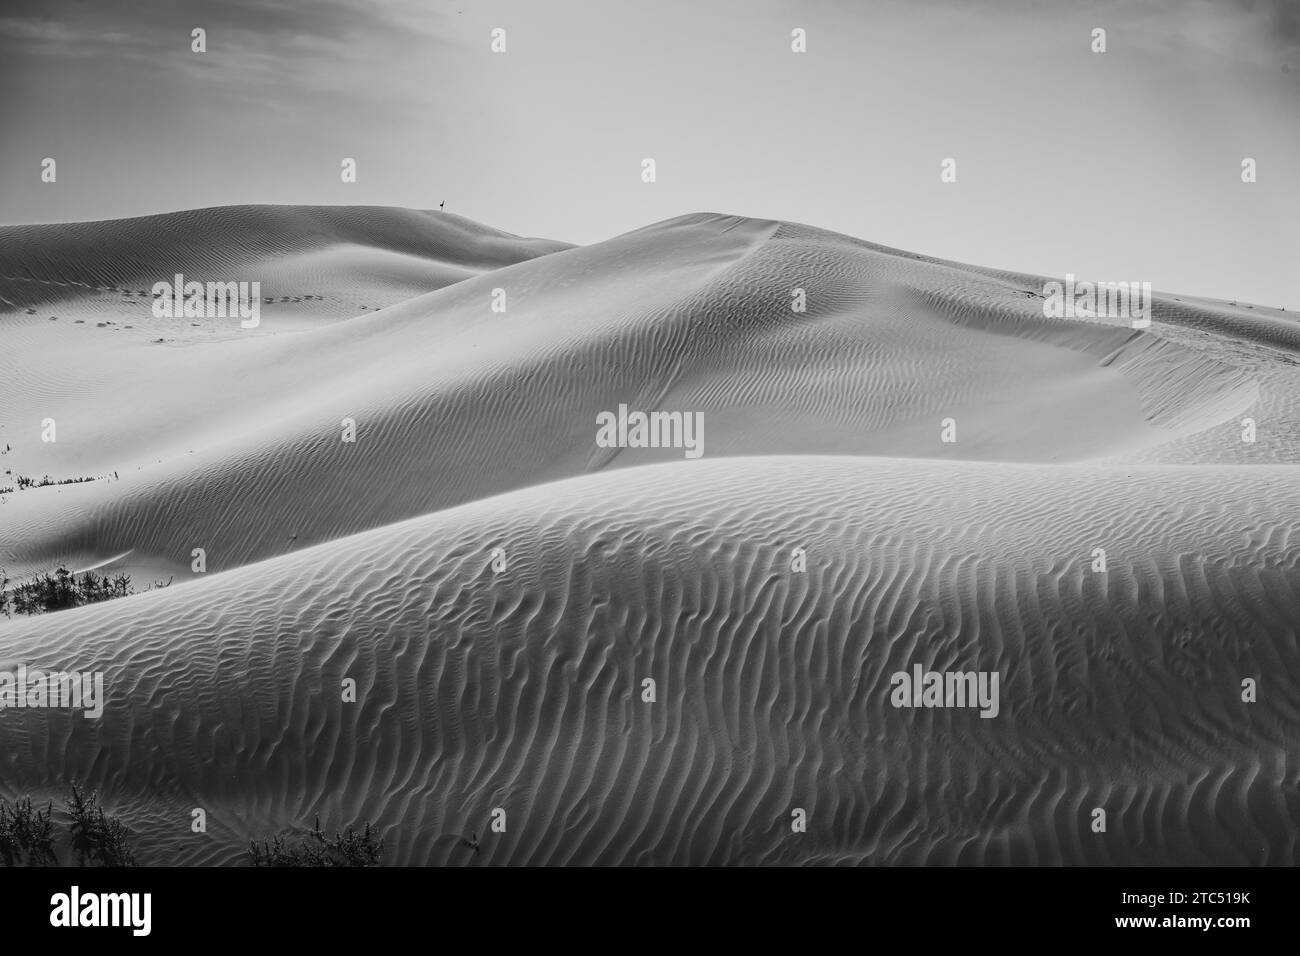 Beautiful untouched sand dunes in Inner Mongolia, China. Wallpaper, background image with copy space for text, black and white Stock Photo